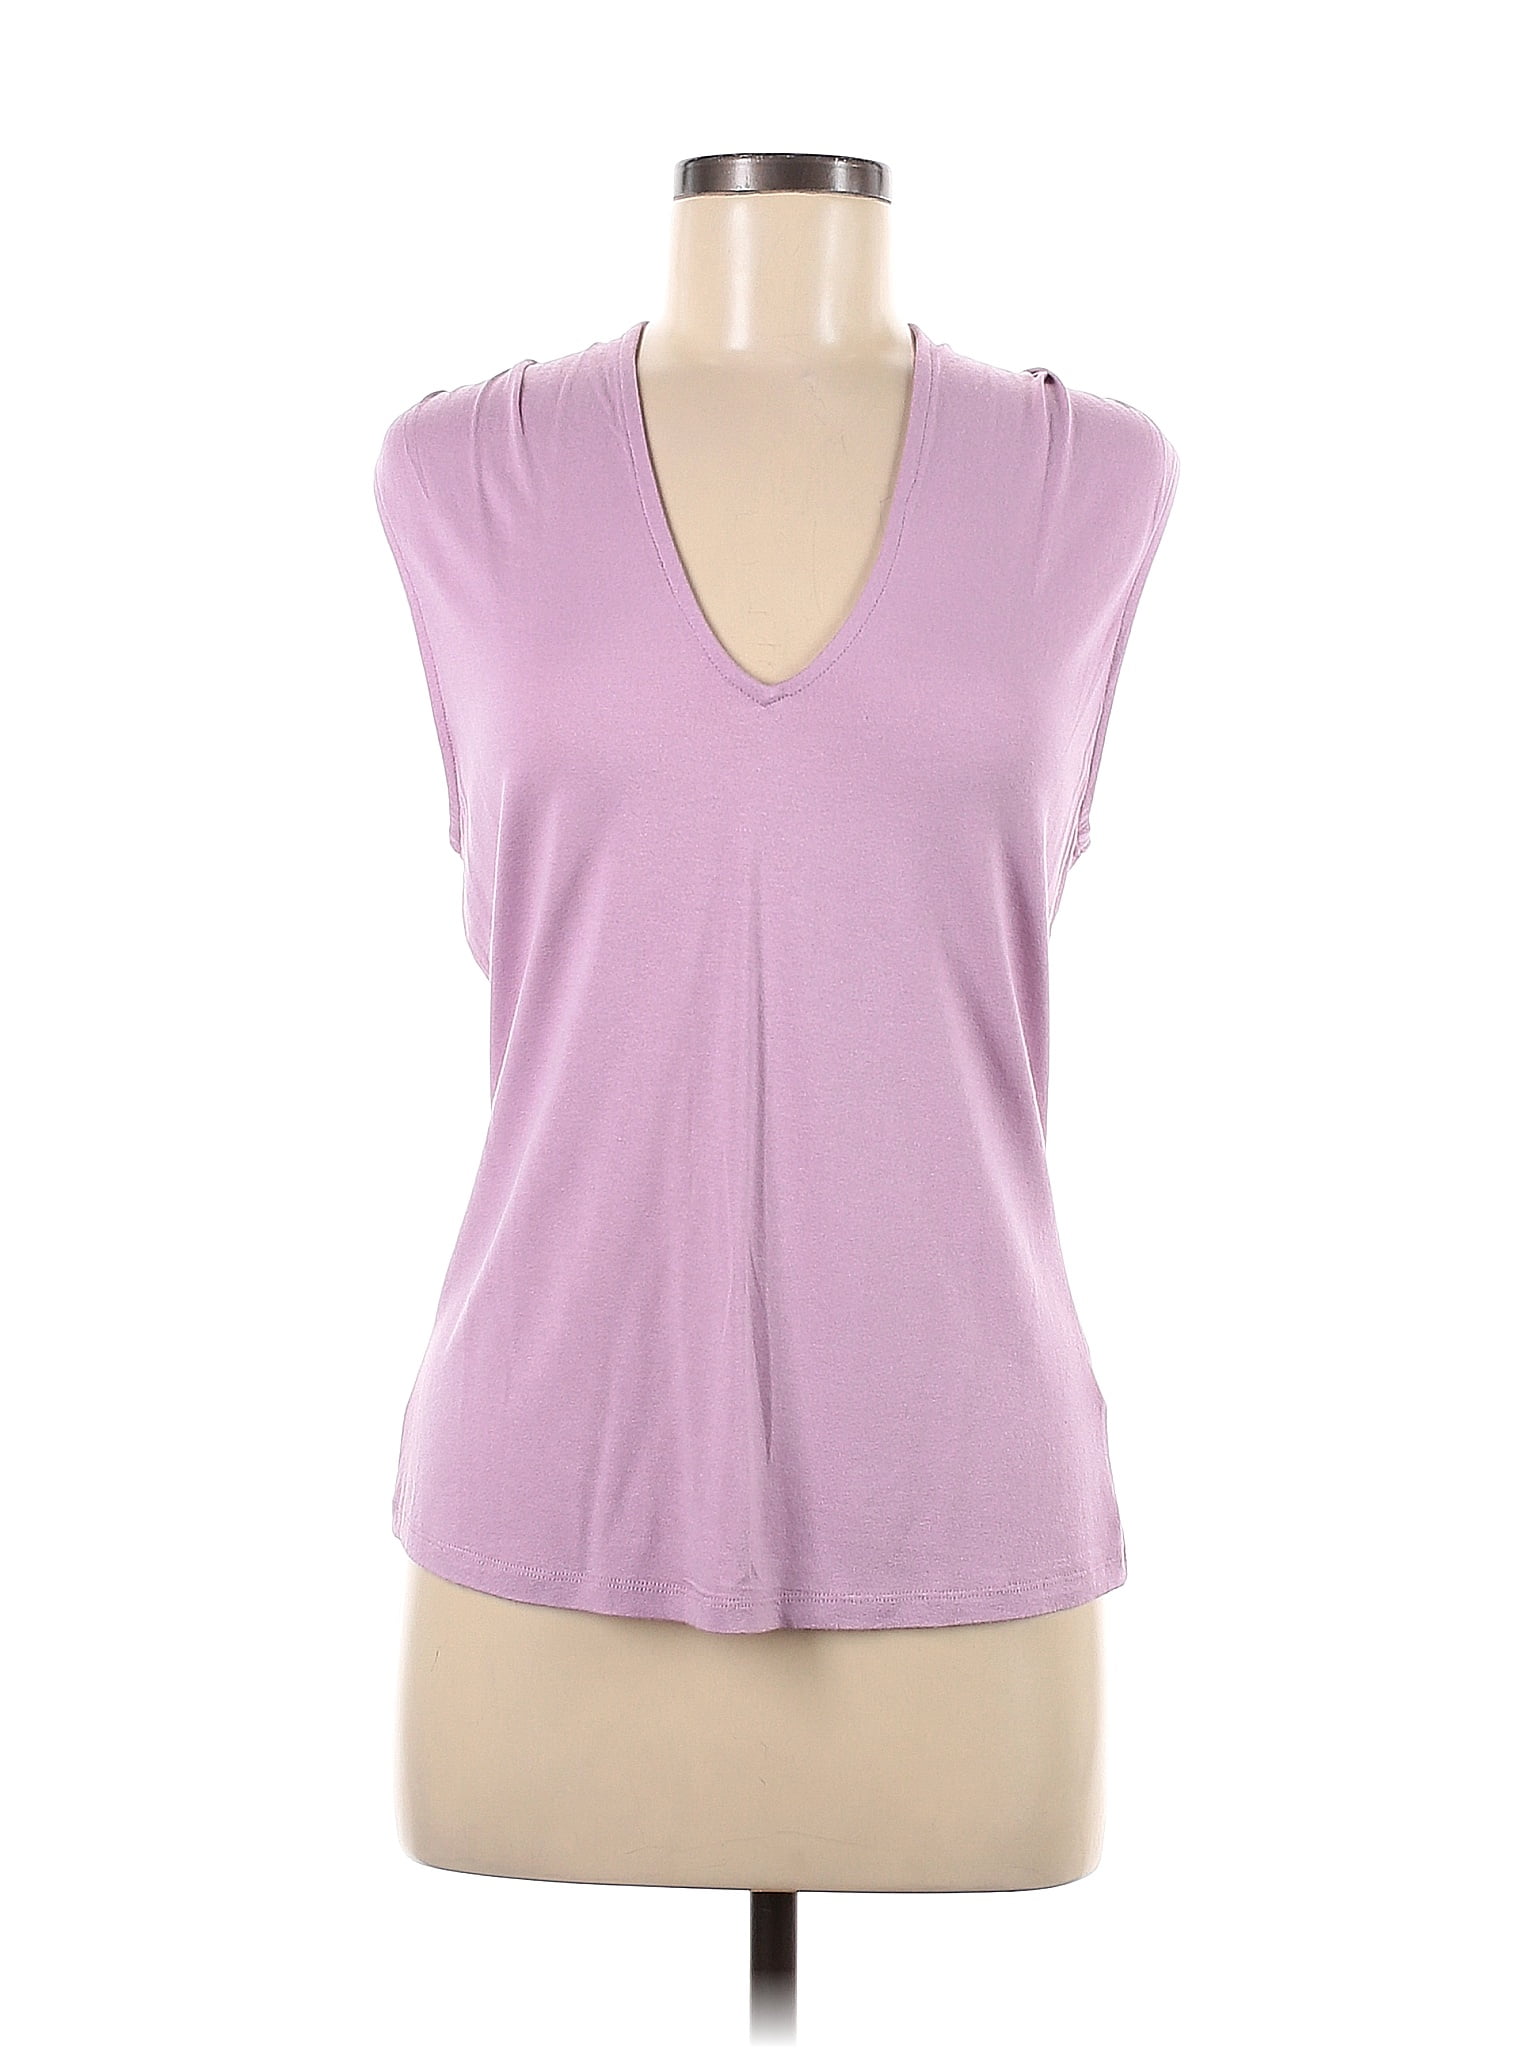 14th & Union, Tops, 4th Union White Cami Tank Top Size Xs